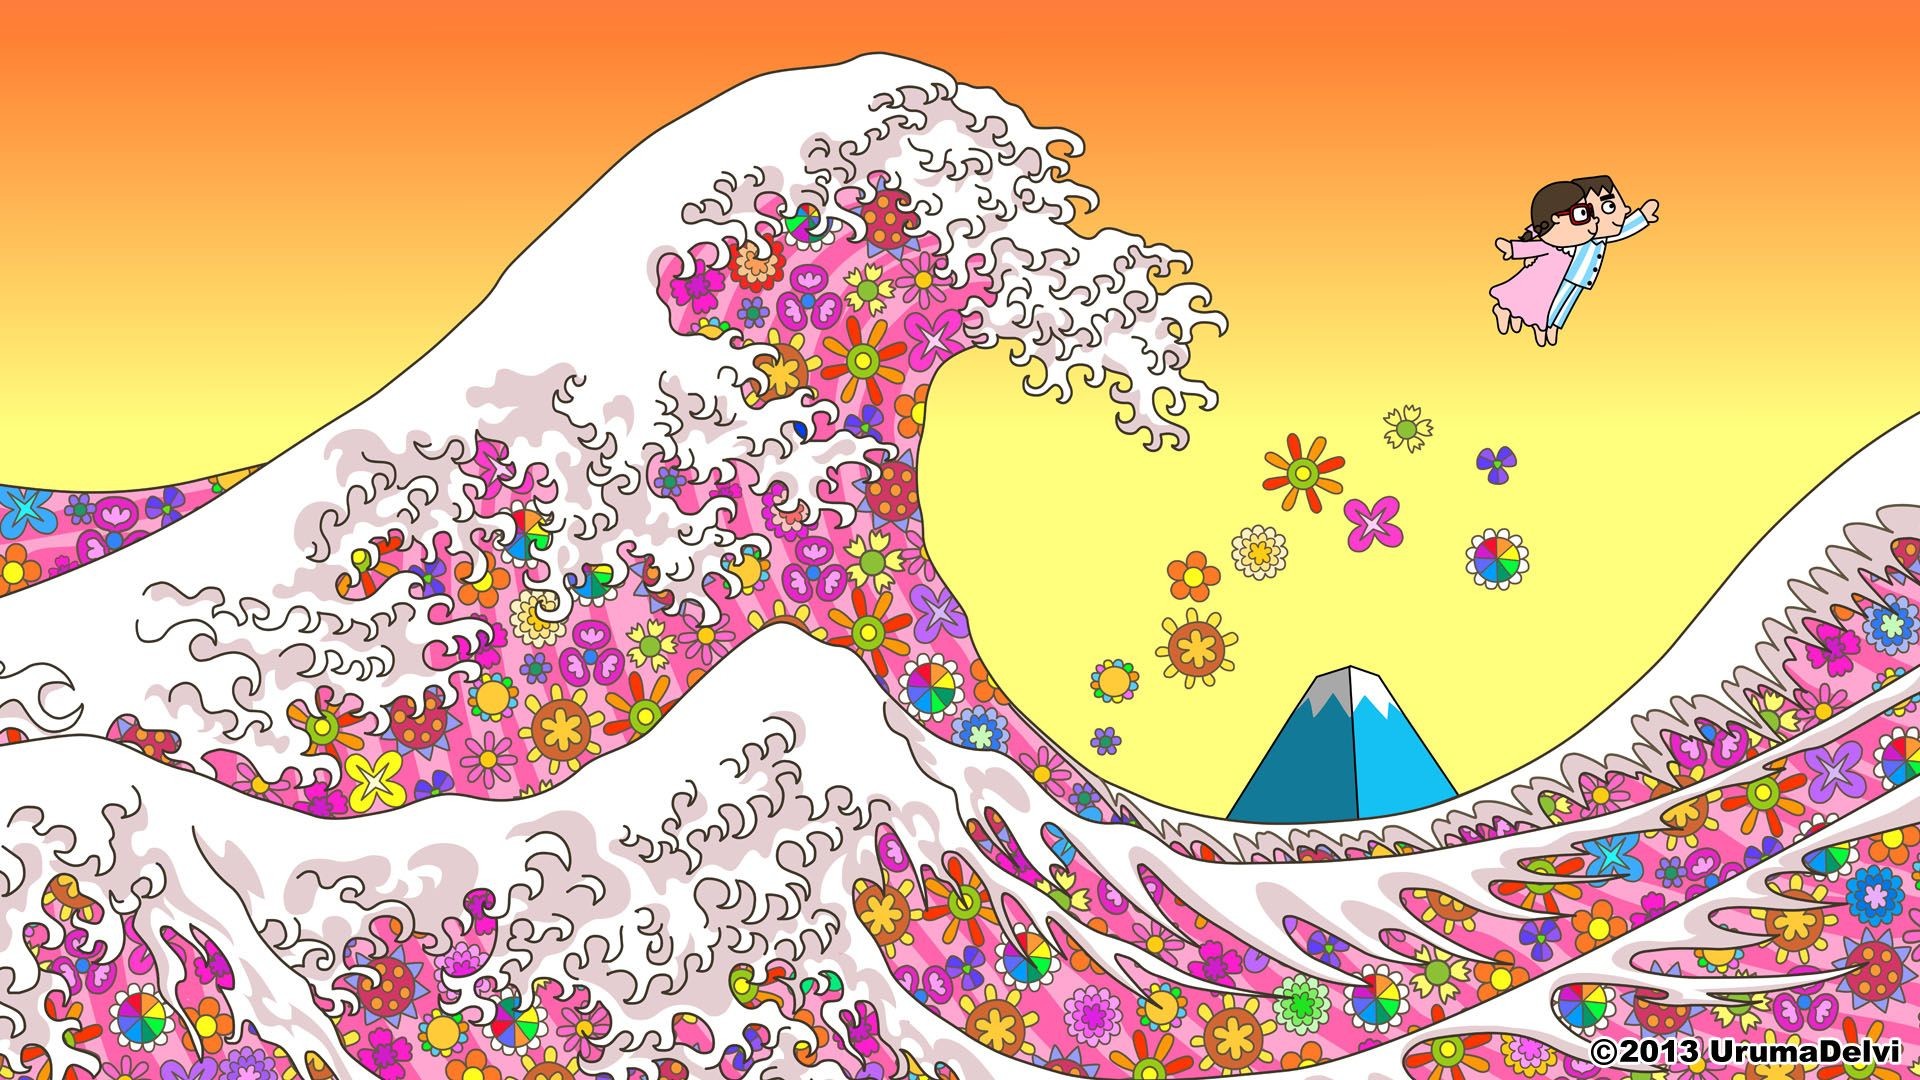 1920x1080 1333x600 the great wave and rising sun by jmanyankees on DeviantArt">